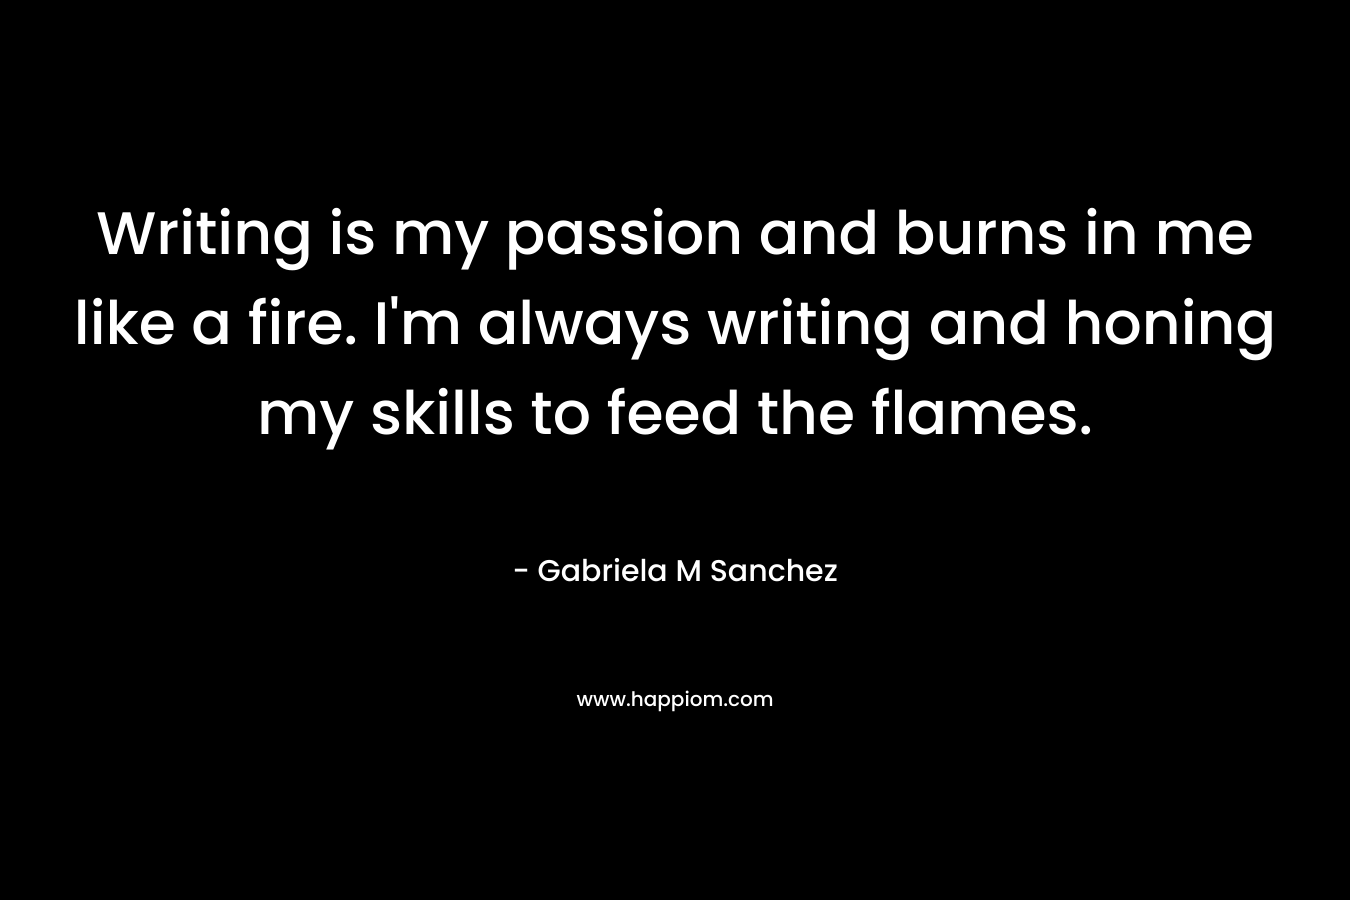 Writing is my passion and burns in me like a fire. I'm always writing and honing my skills to feed the flames.